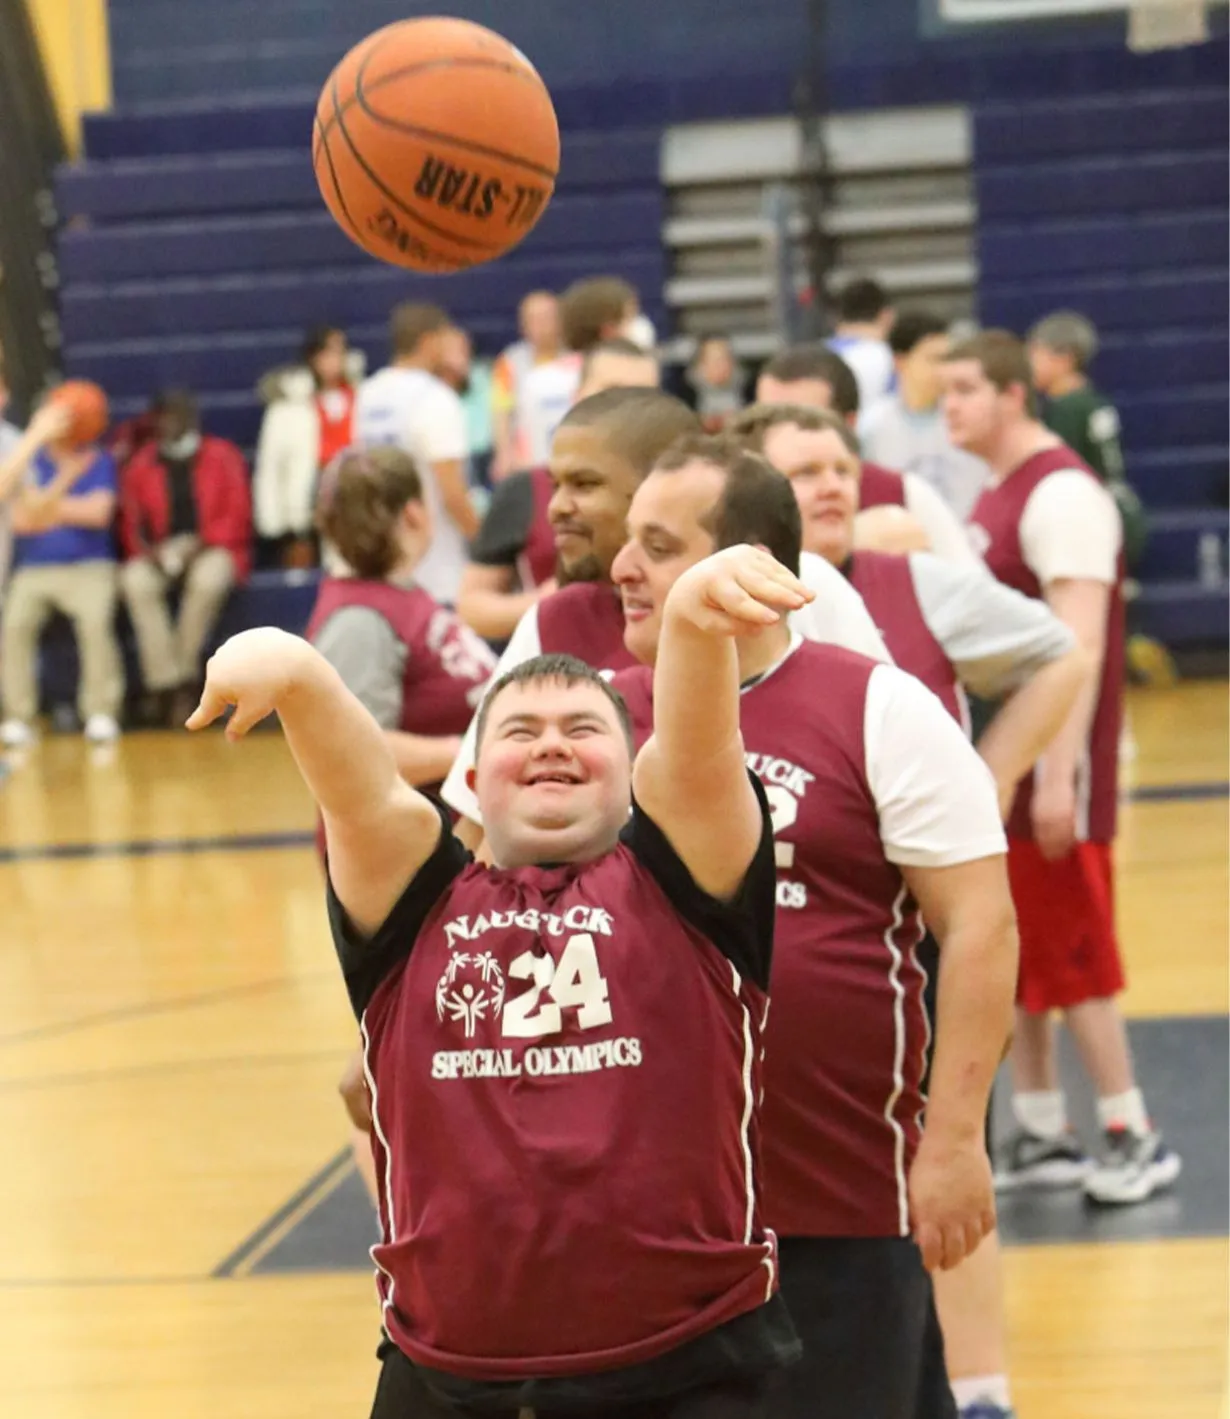 Male athlete shooting a basketball wearing a Naugatuck Special Olympics maroon jersey.